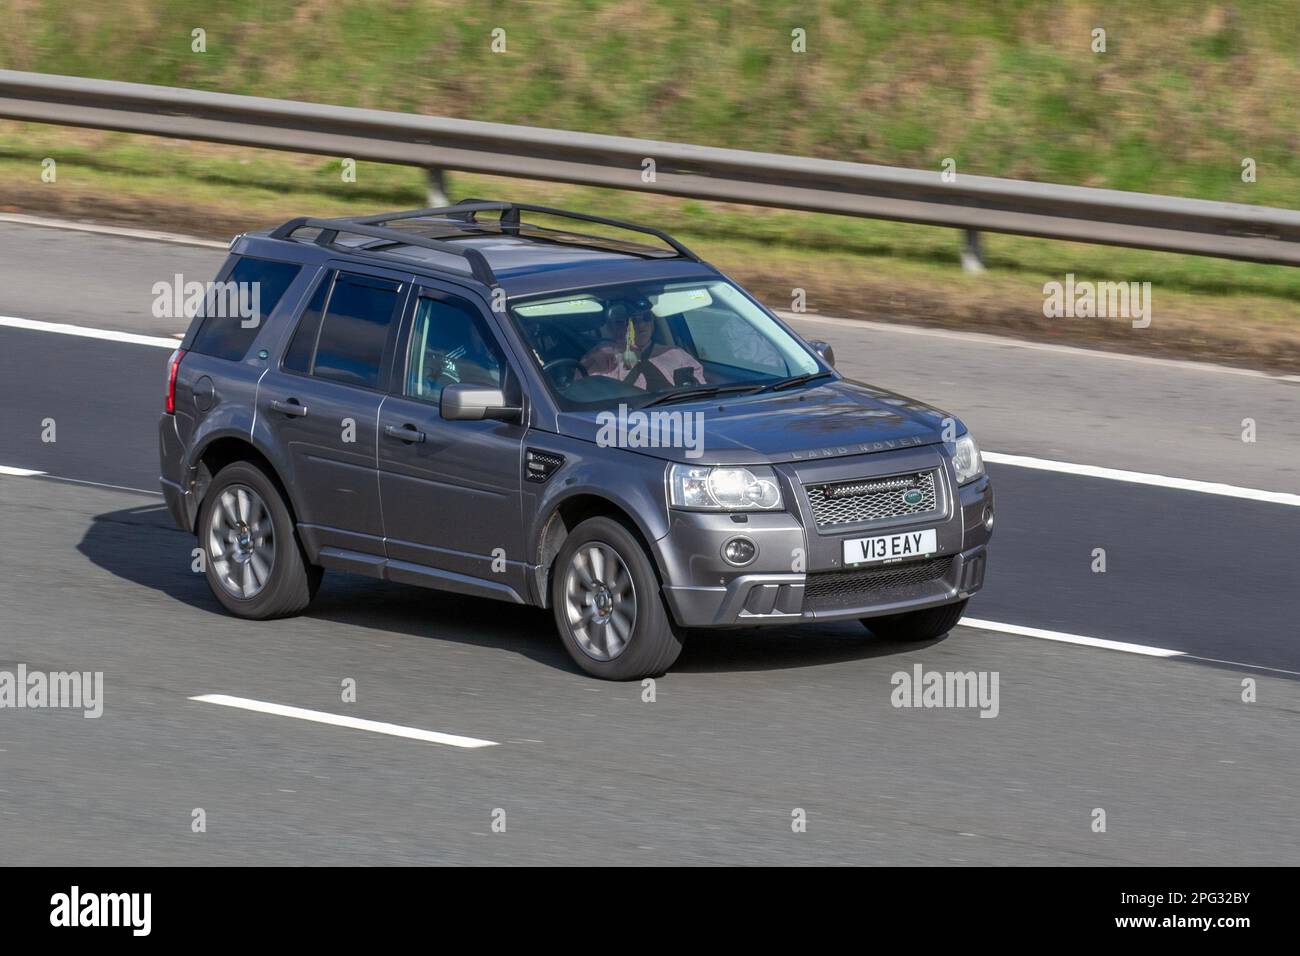 2008 Grey LAND ROVER FREELANDER TD4 GS 2179cc Diesel 6 speed automatic;  travelling on the m6 motorway, UK Stock Photo